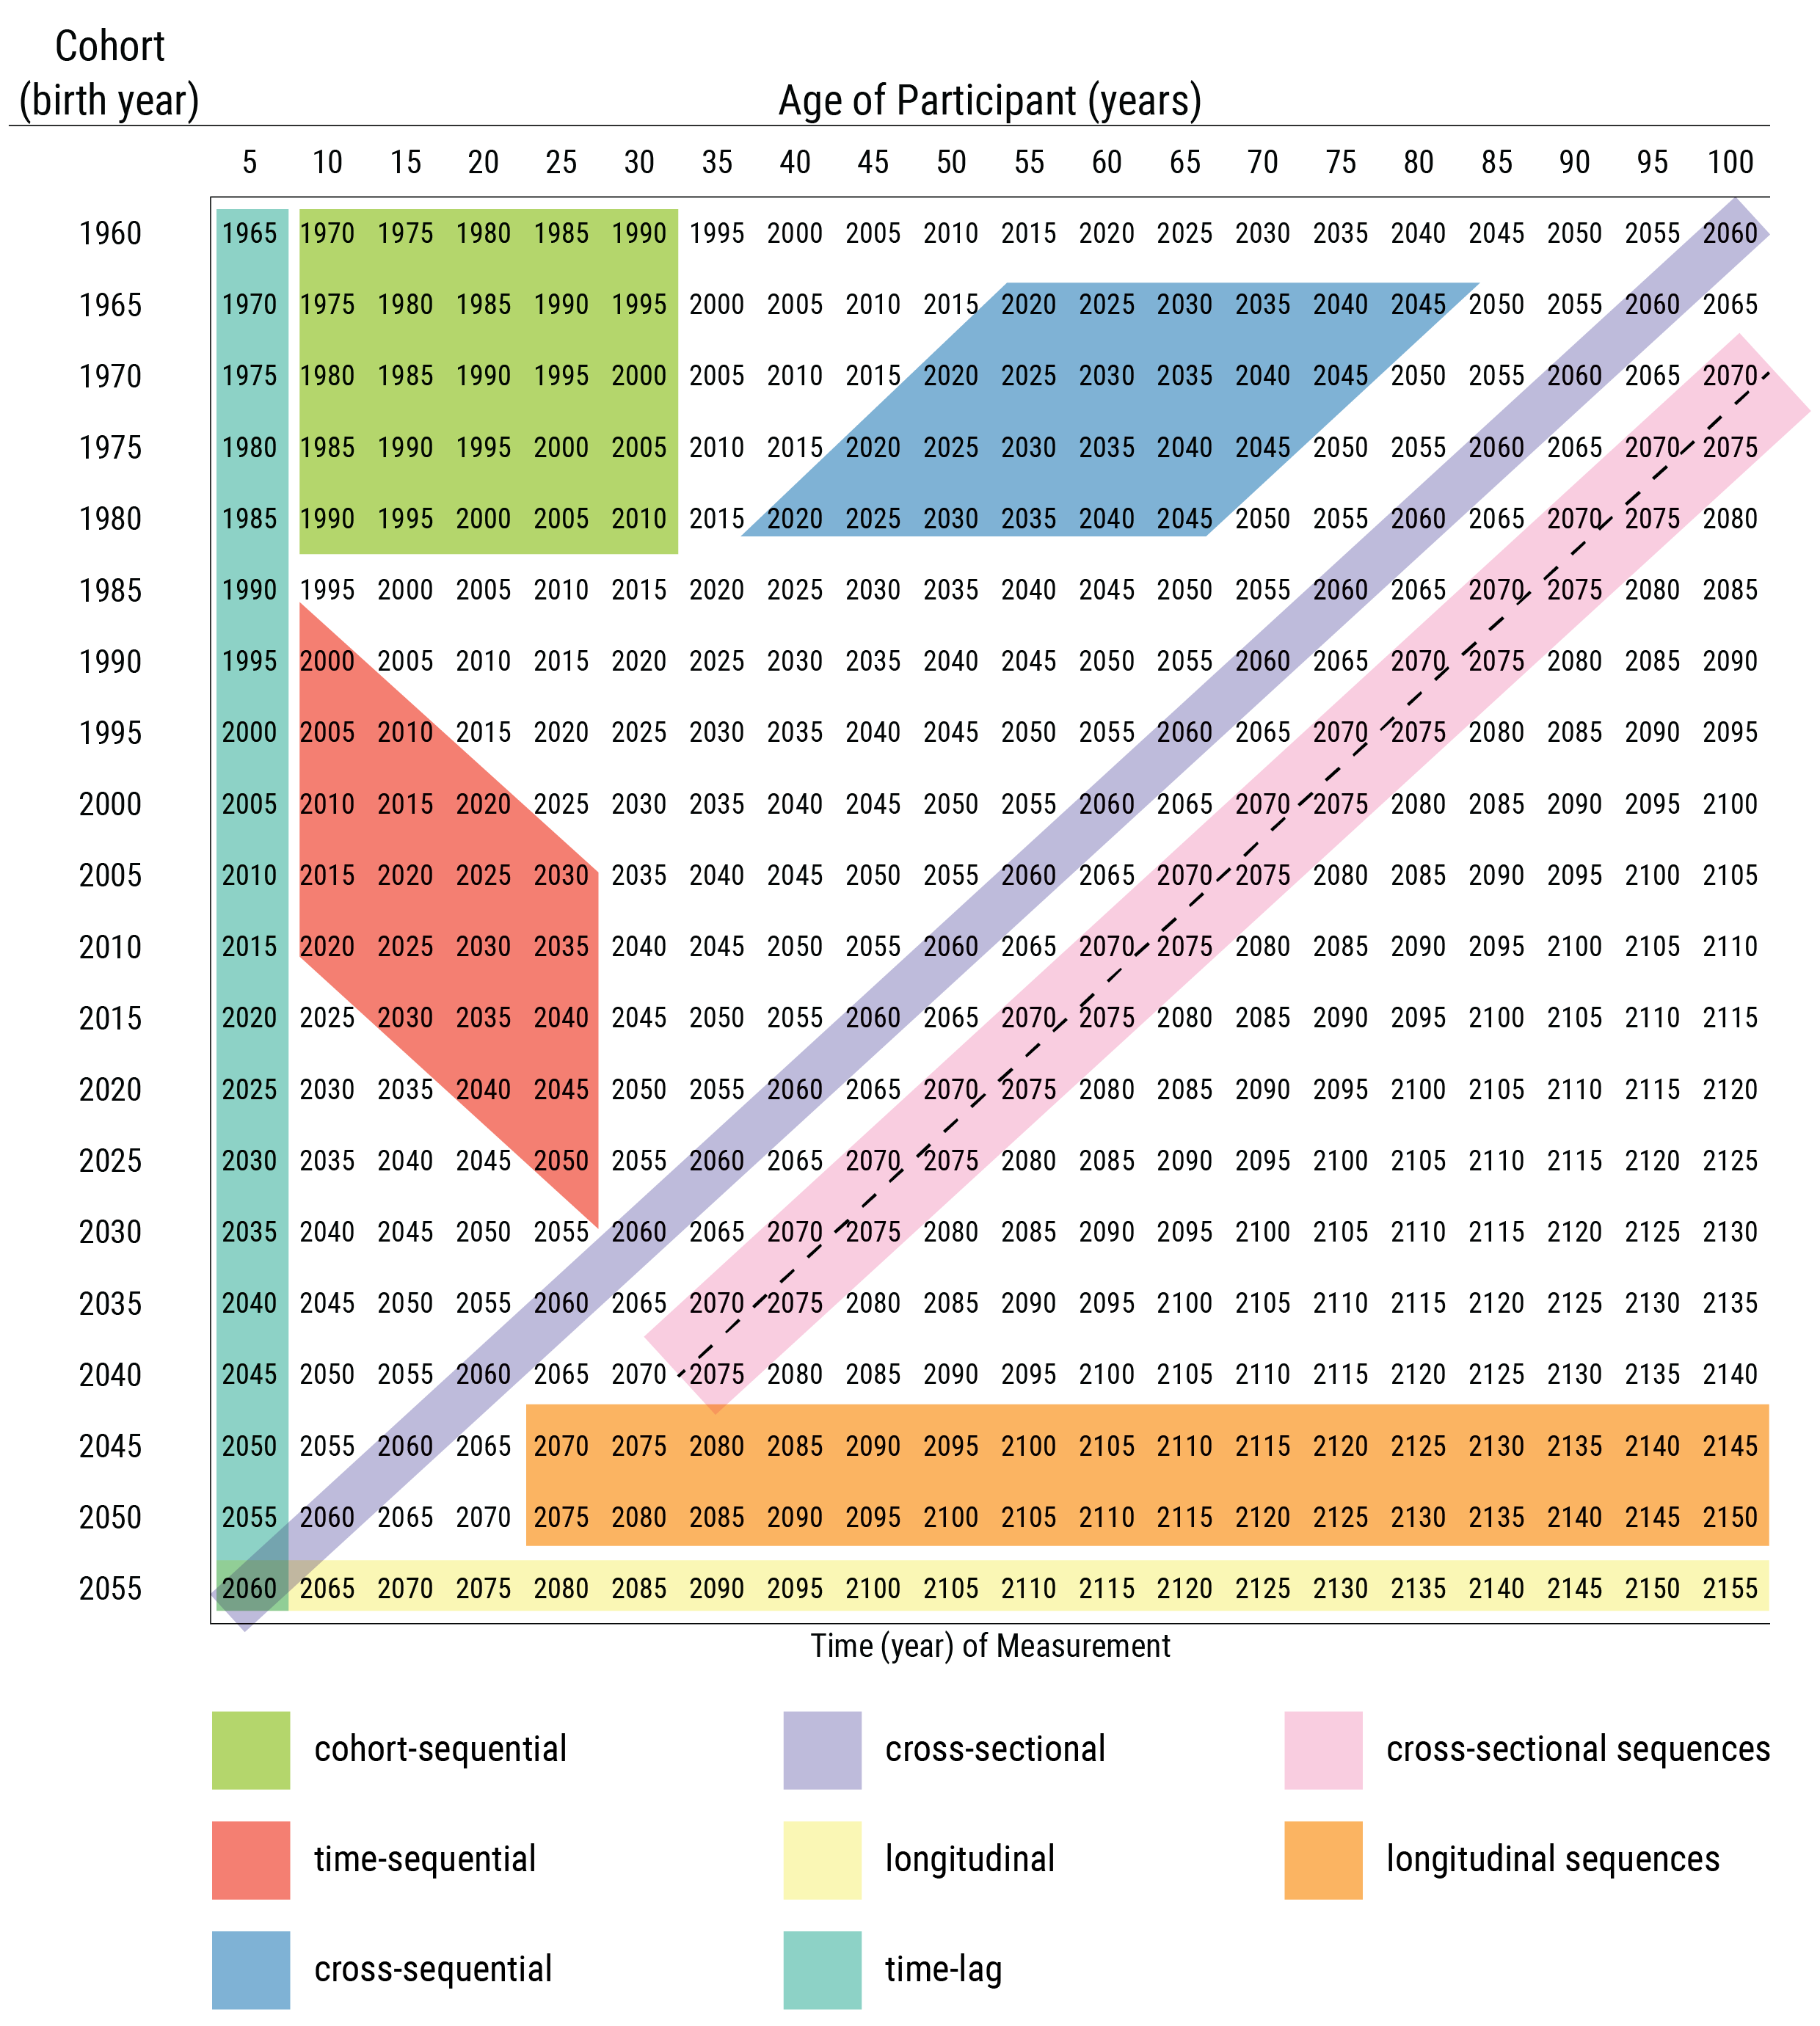 Research Designs by Age and Cohort. Values in the cells are the times (years) of measurement. Dashed line indicates different participants were assessed at each time of measurement.